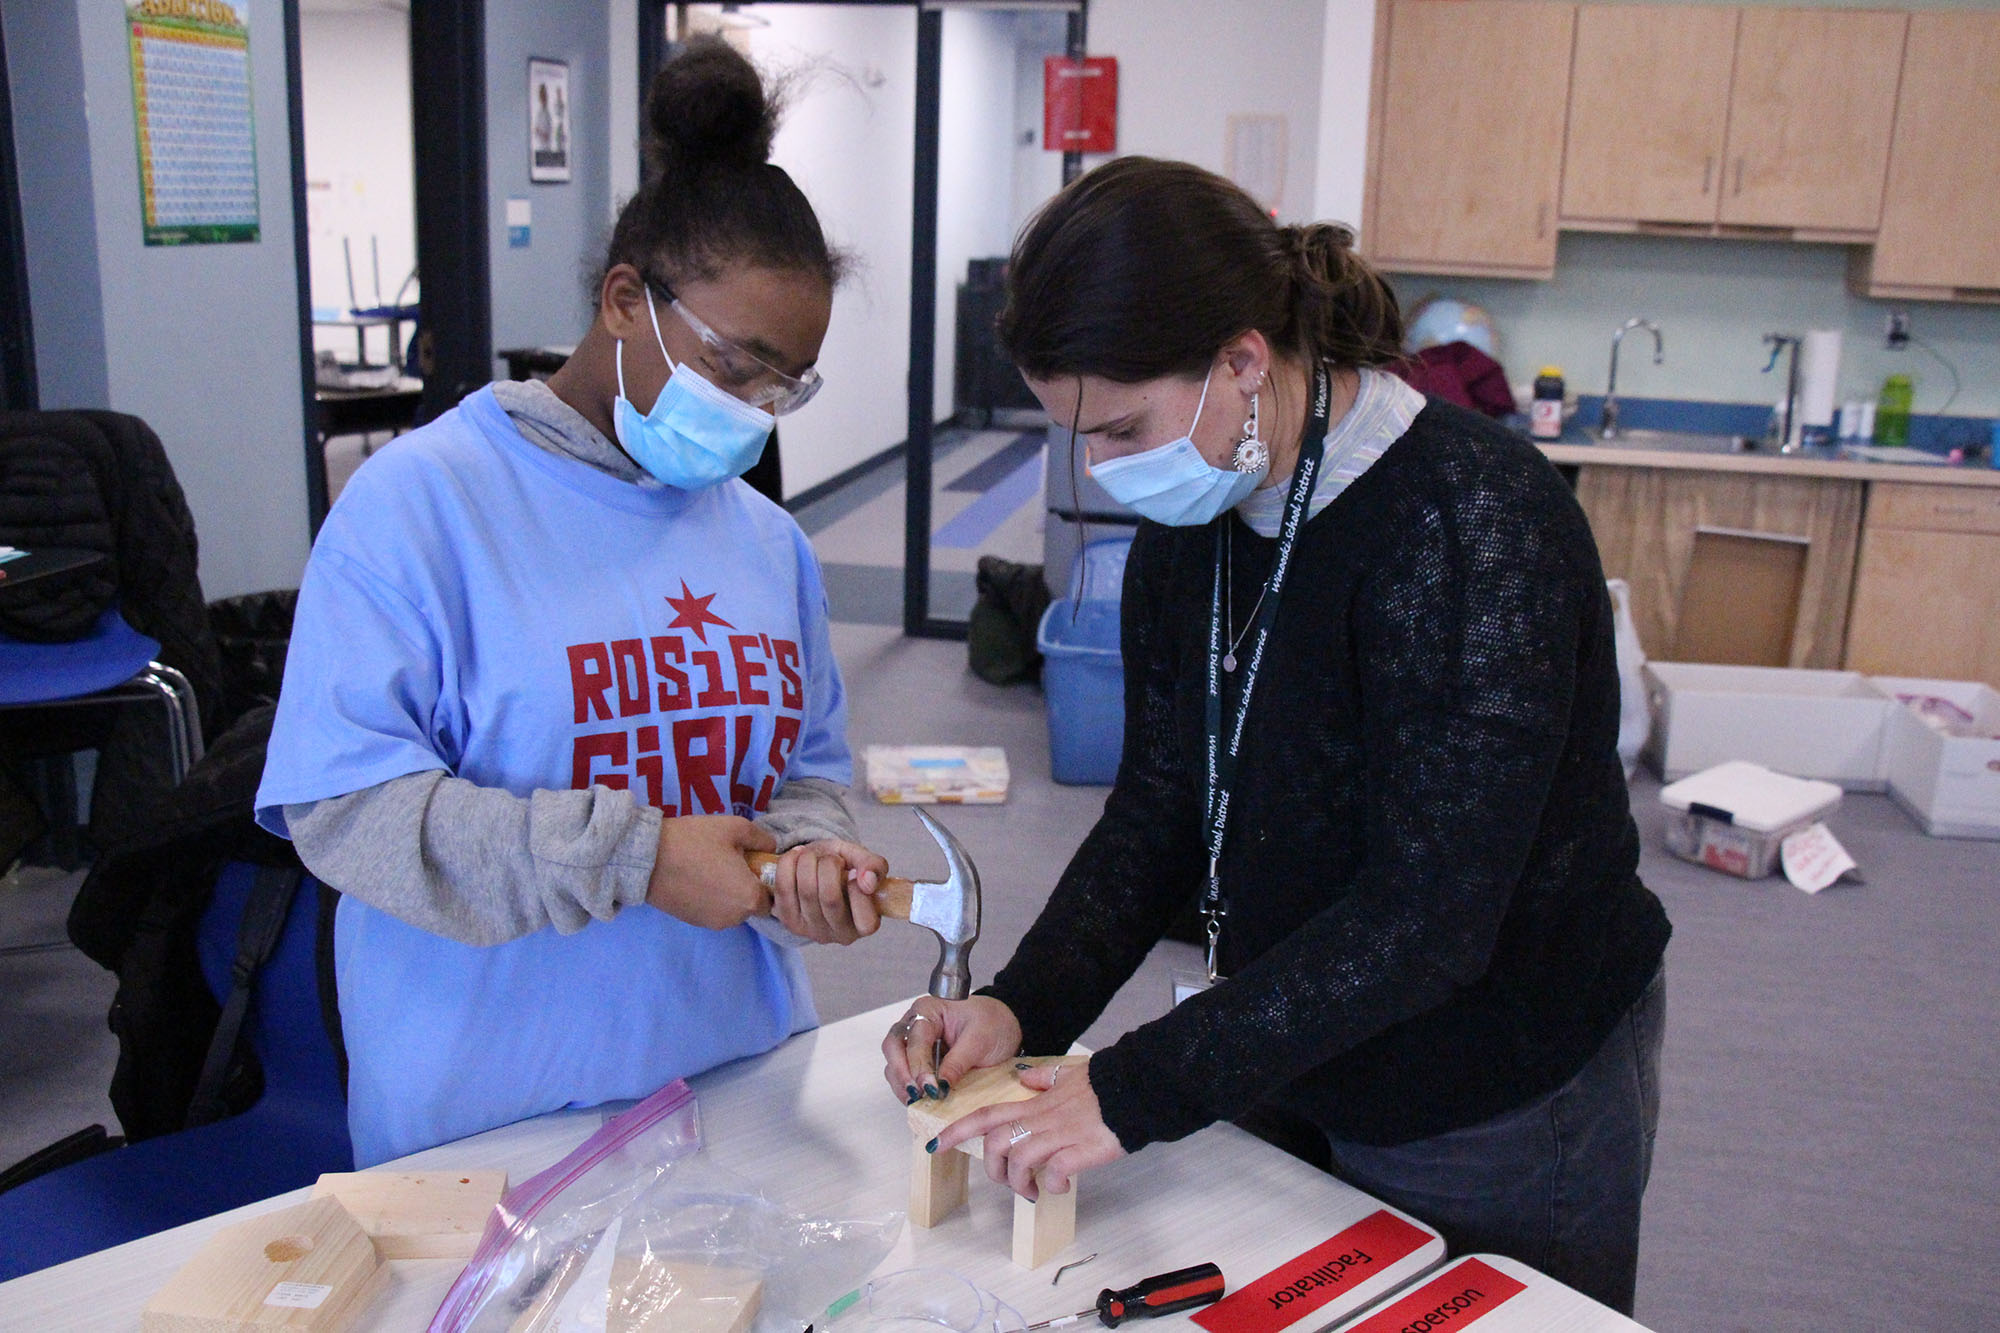 A volunteer instructor assists a middle school student with building a wooden birdhouse.